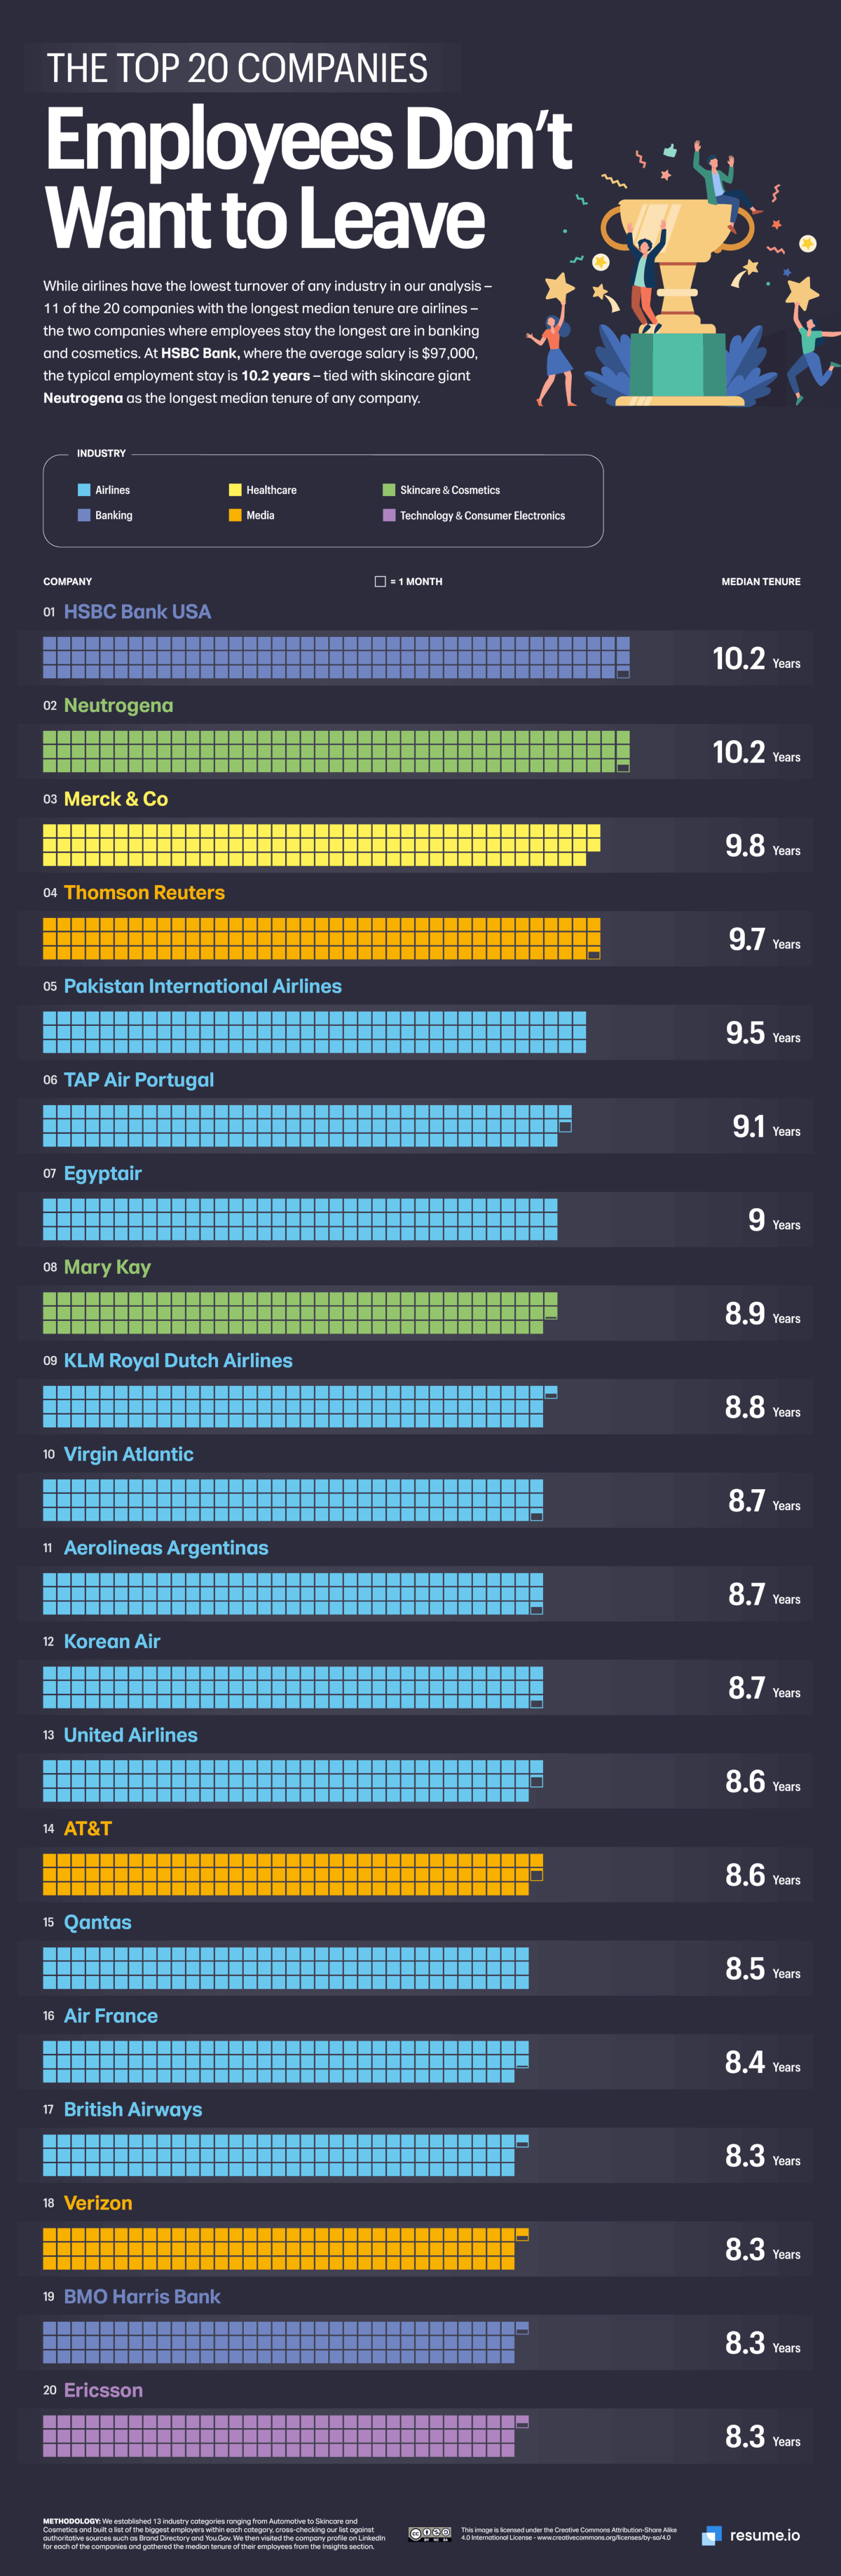 resume.io infographic on the companies employees don't want to leave